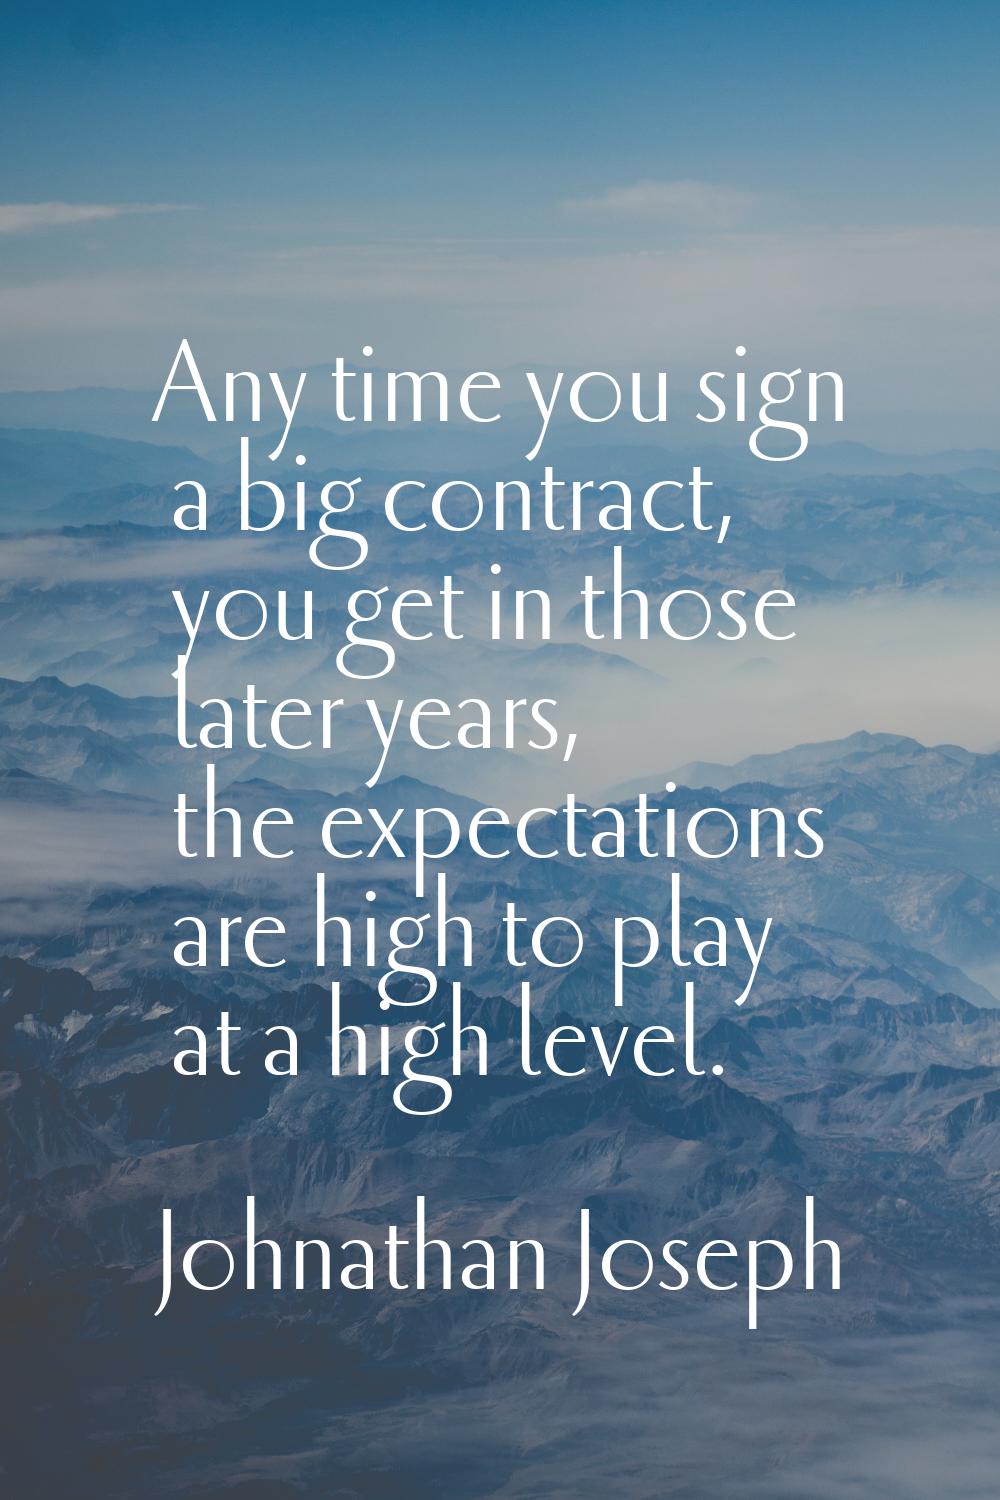 Any time you sign a big contract, you get in those later years, the expectations are high to play a